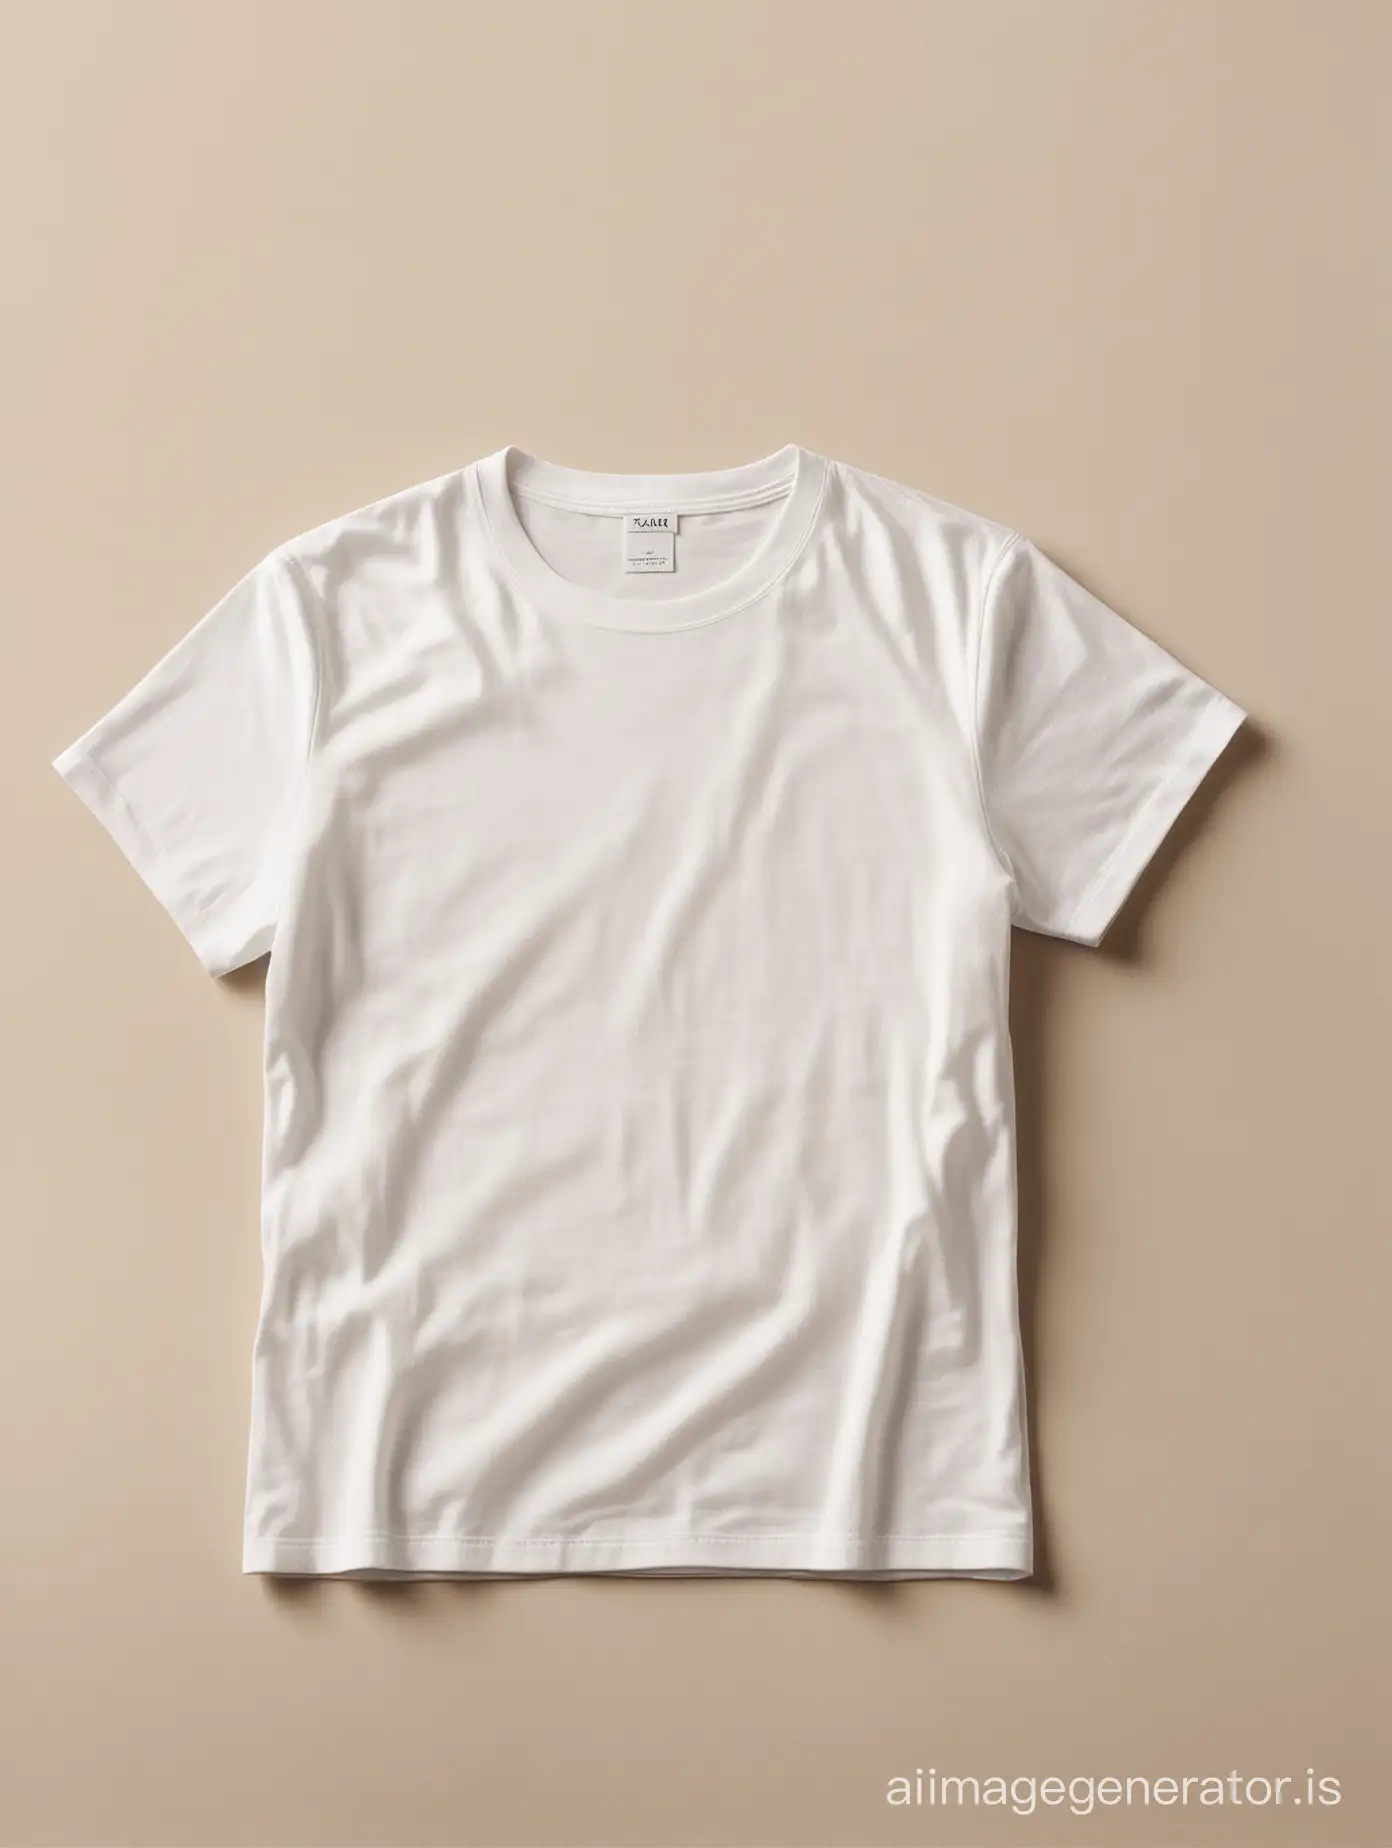 A high-resolution photo of a perfectly folded flat square white cotton t-shirt with one white label, styled for a Zara brand catalog. Warm natural sunlight streams in from the left side of the image, highlighting the rich texture  of the natural fabric. The t-shirt should be meticulously folded into a square, with sharp edges and no wrinkles or imperfections. Imagine the fold as a series of precise rectangles stacked upon each other, creating a flawless geometric form. Maintain a minimalist, clean background for a polished look.